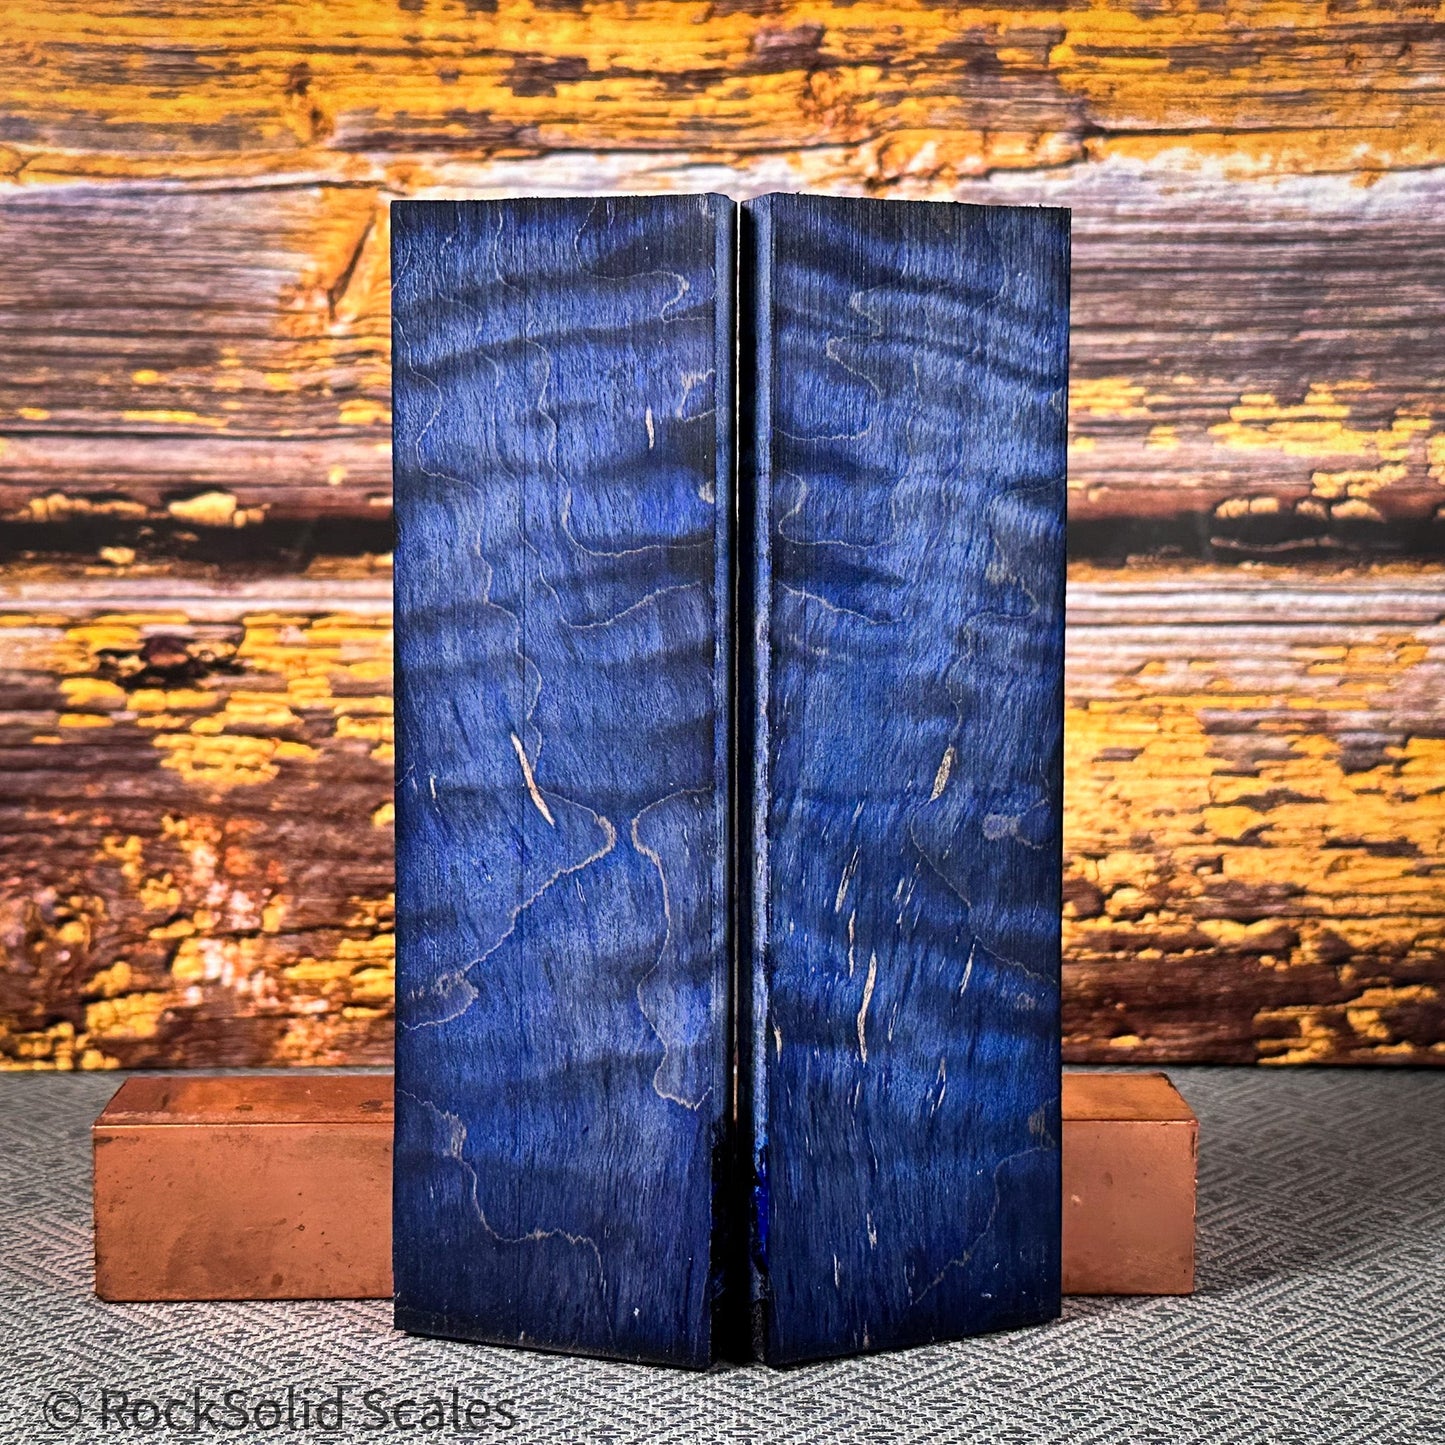 #2359 - Blue and Black Double Dyed Curly Maple - RockSolid Scales -